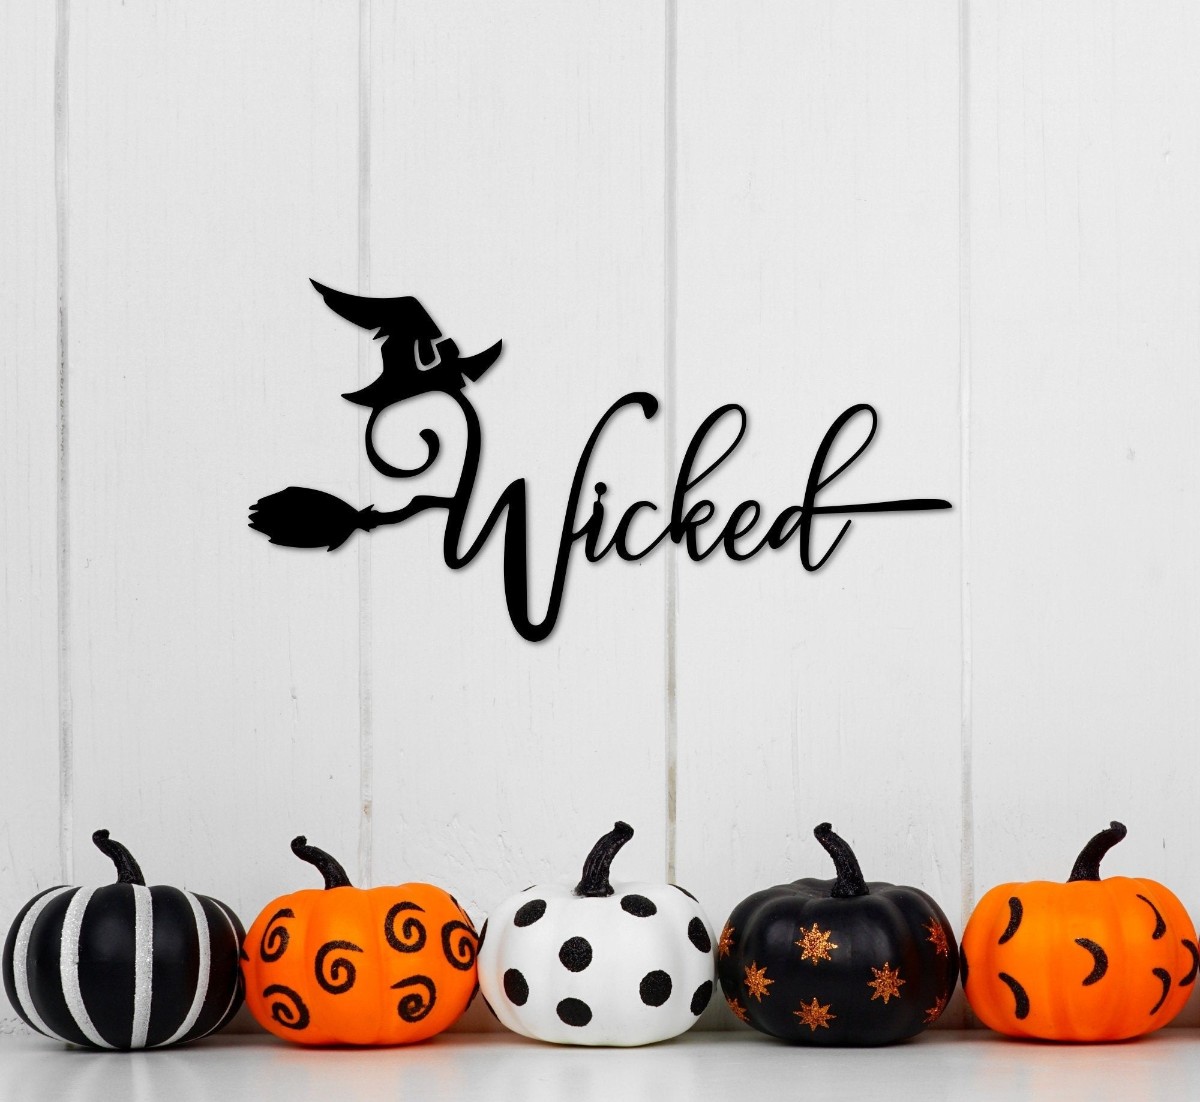 Metal Wicked Witch Sign - Metal Wall Art - Halloween Sign - Witch Decor - Wicked Wall Word - Halloween Decor - Witch Hat And Broom Metal Art